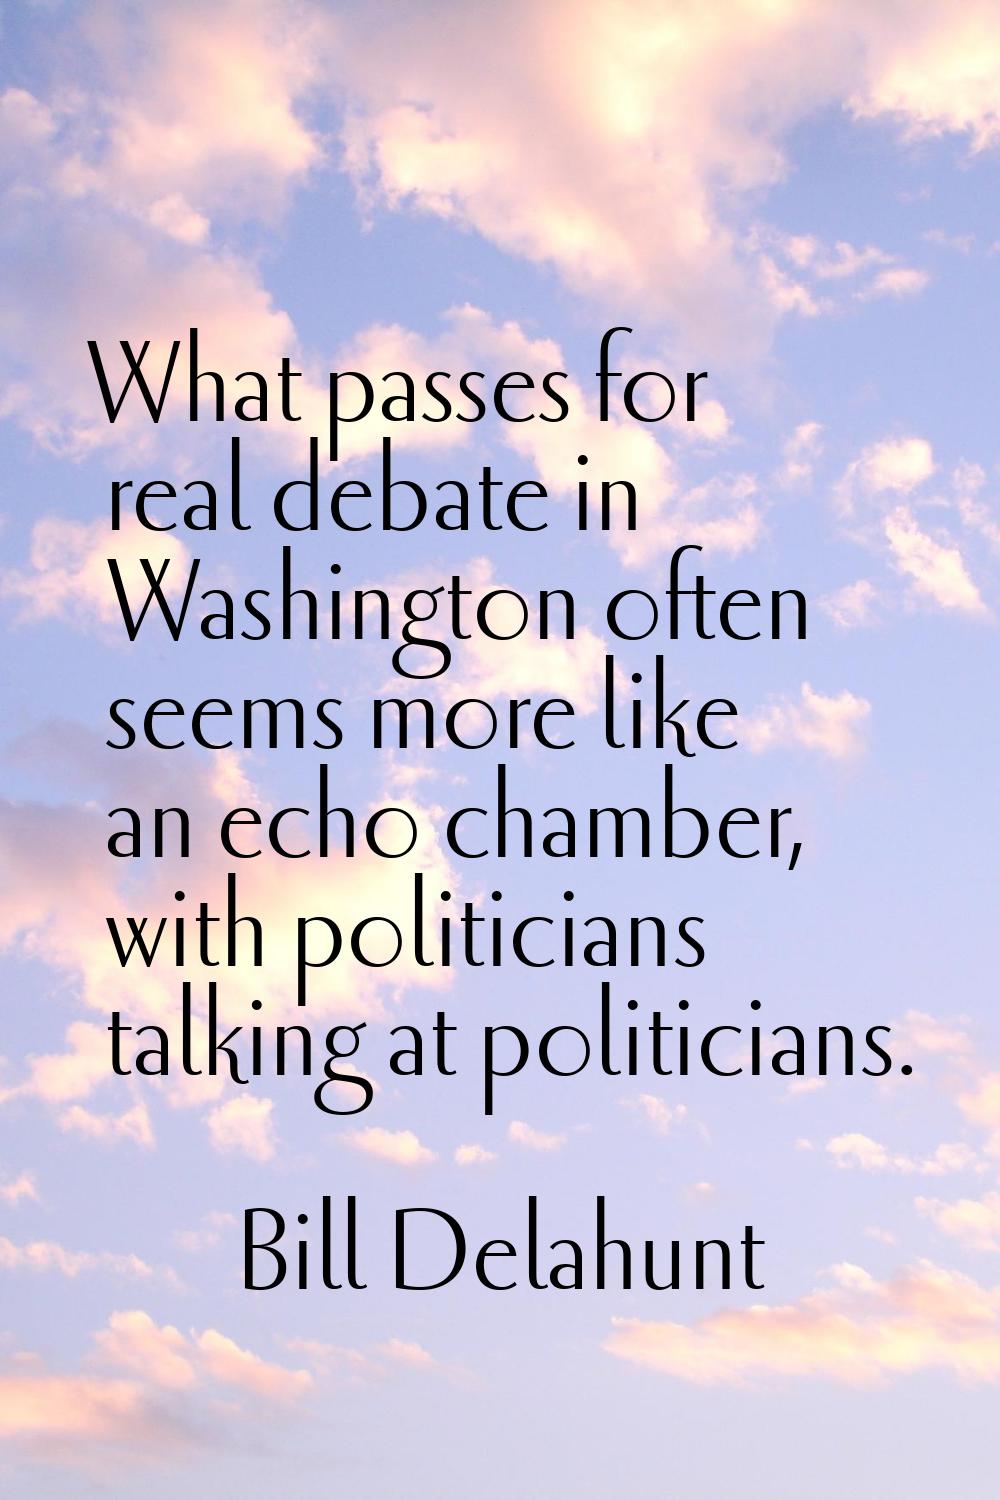 What passes for real debate in Washington often seems more like an echo chamber, with politicians t